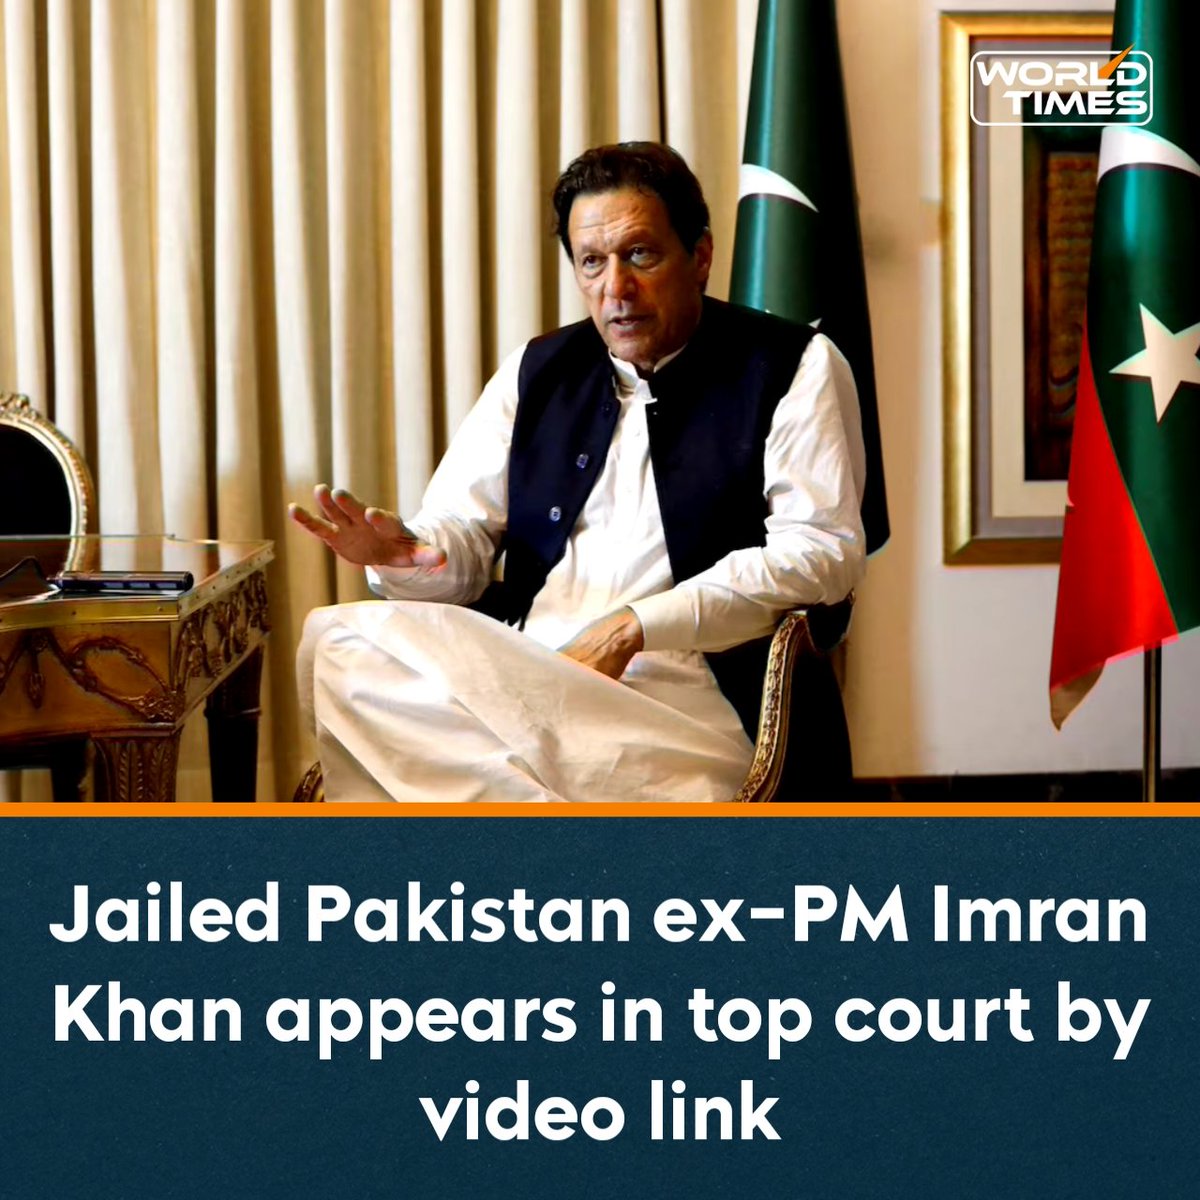 Pakistan's former Prime Minister Imran Khan appeared in the Supreme Court on Thursday by video from prison, in connection with a case he has filed against amendments to Pakistan's anti-graft laws.

His video appearance was expected to be streamed live on the court's website and